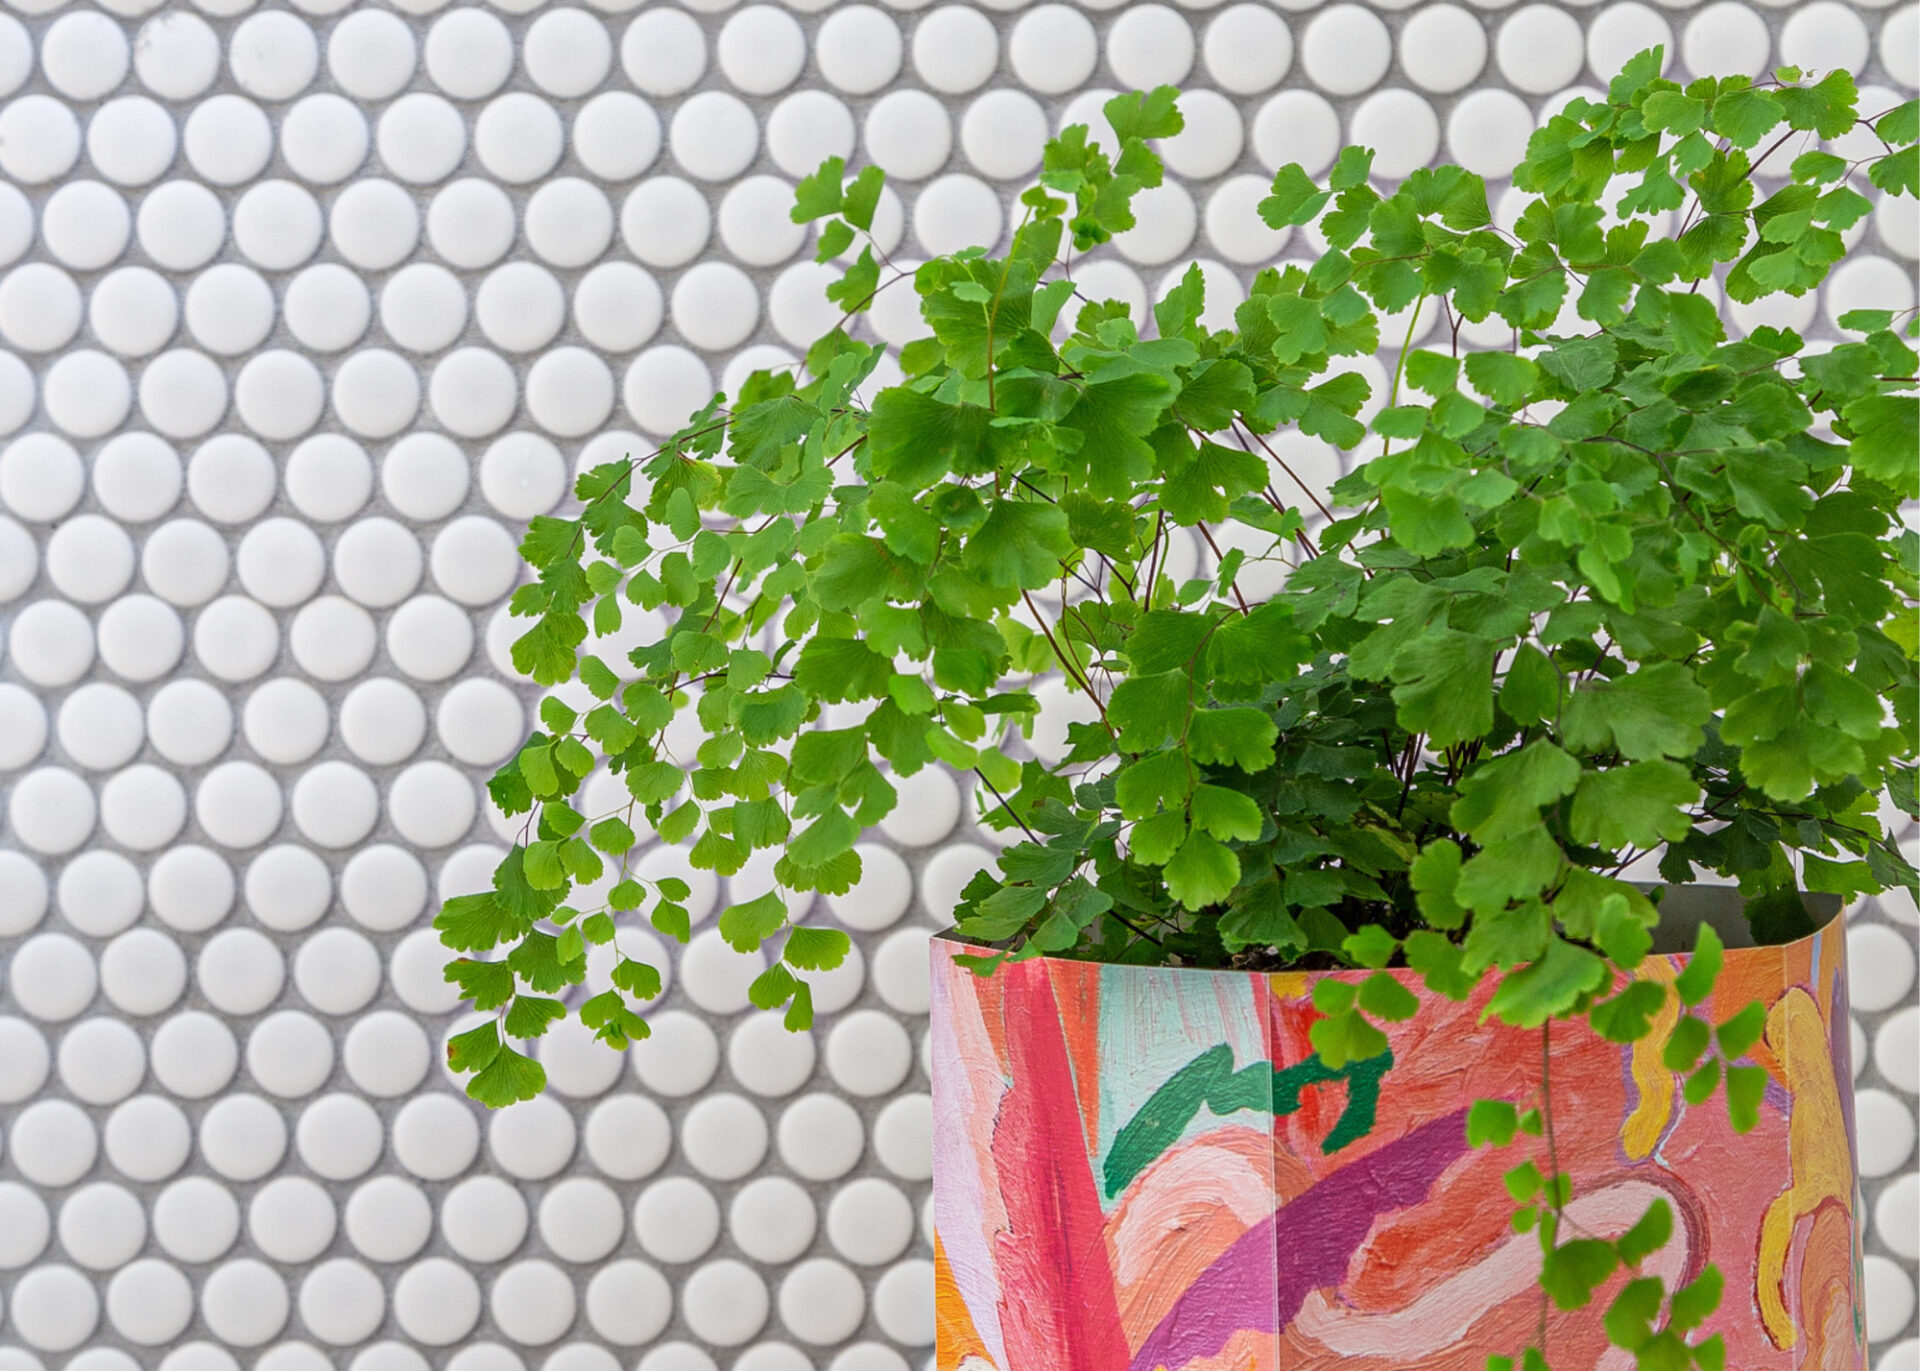 How to care for maidenhair ferns